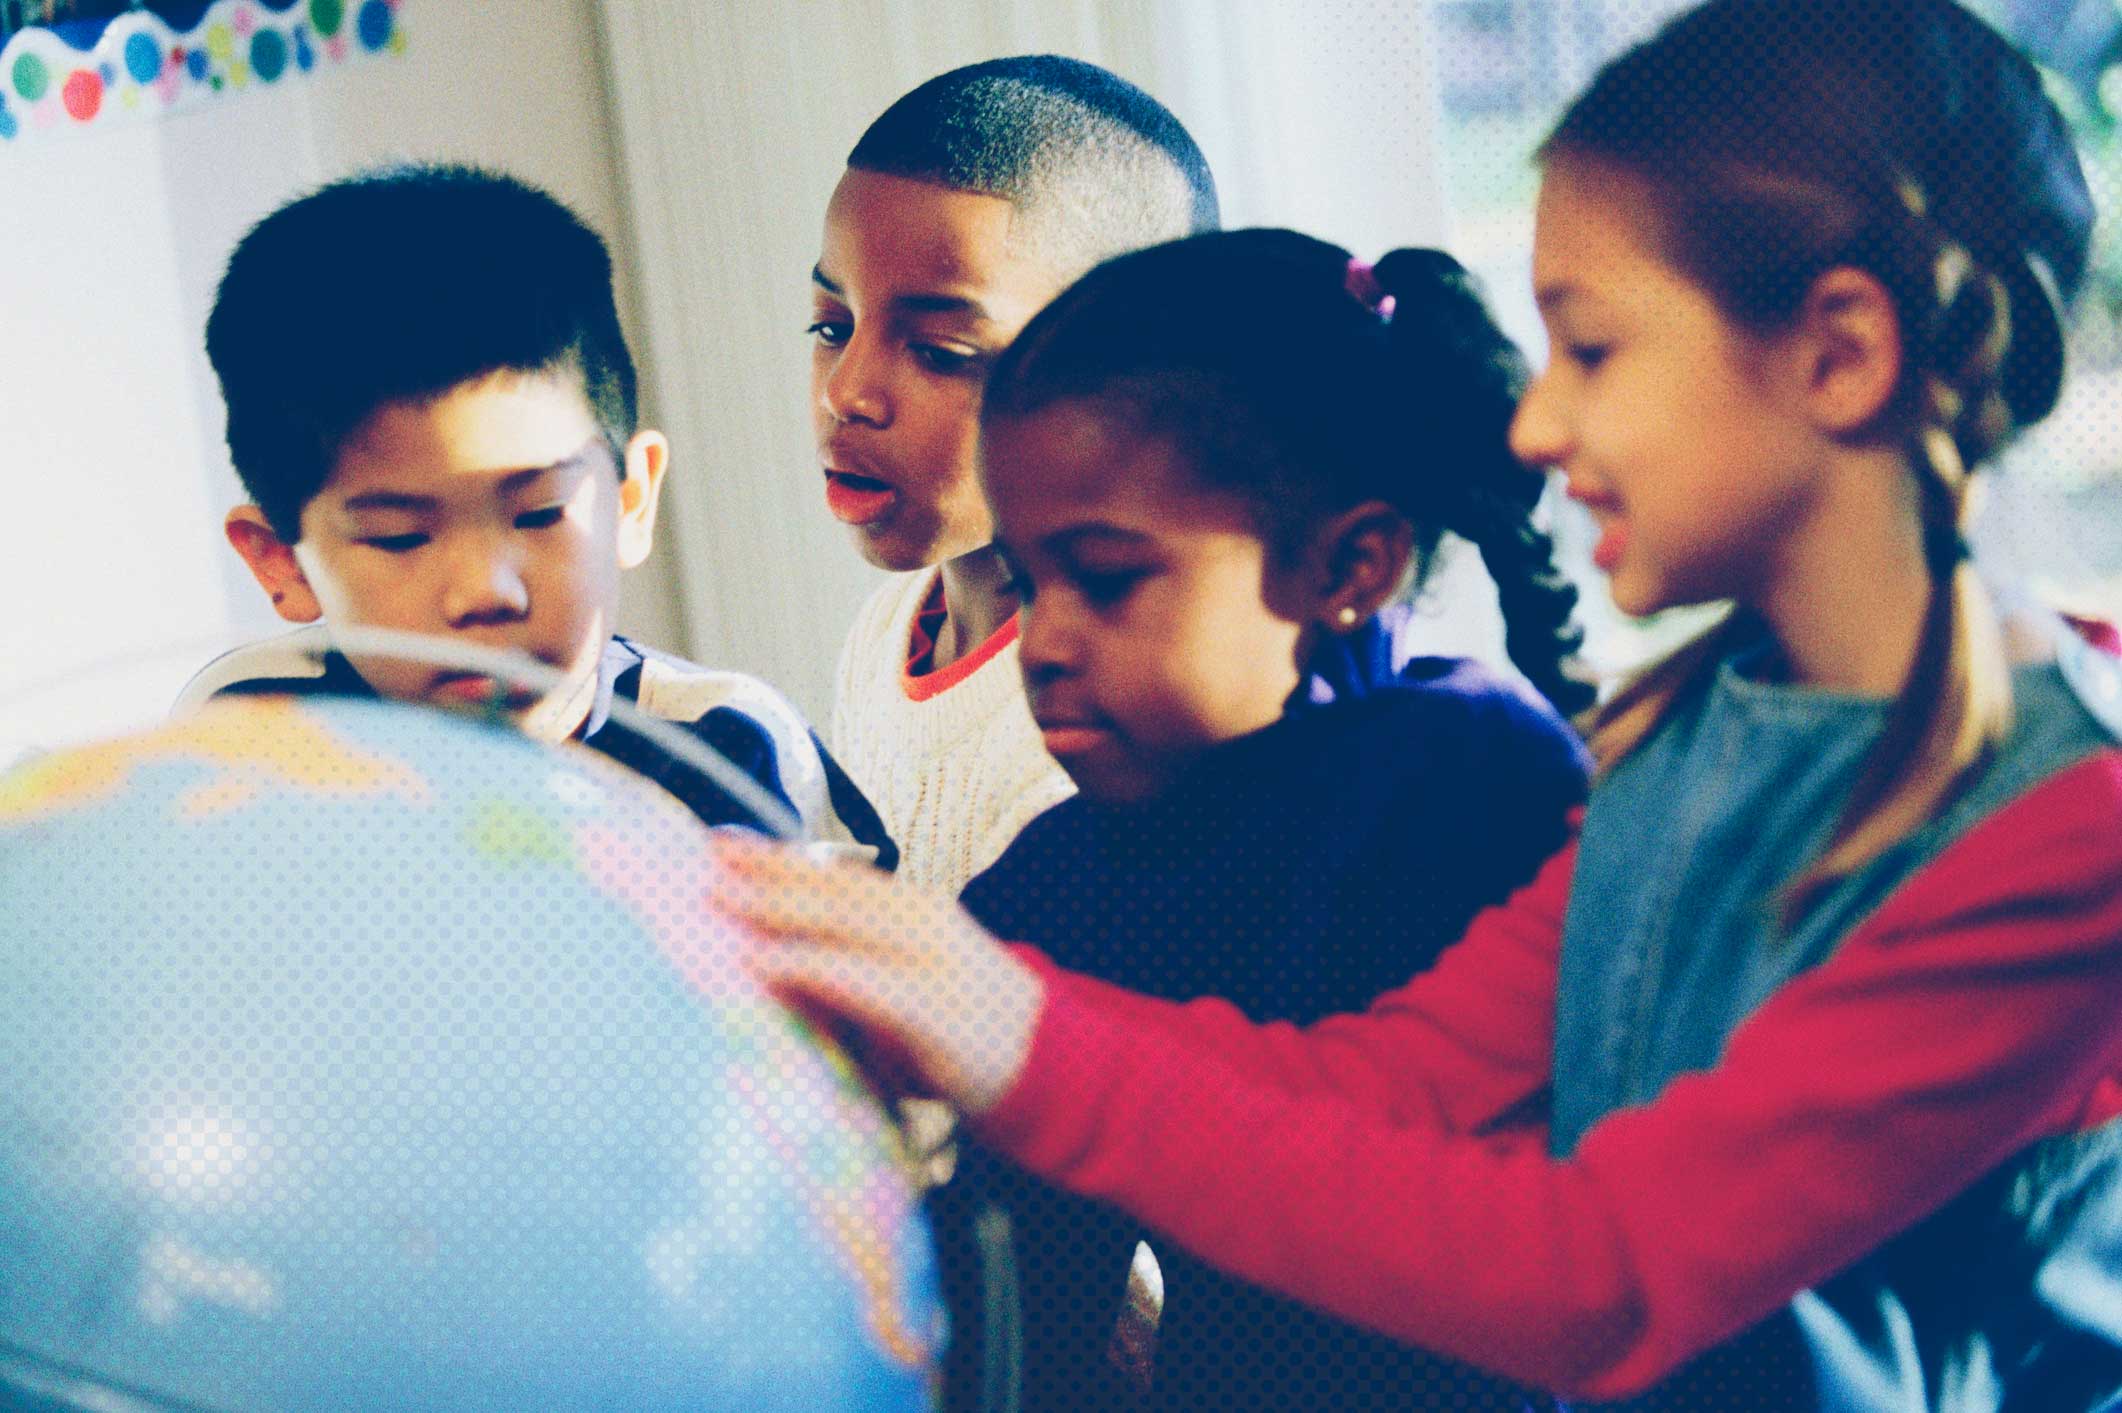 Students playing with a globe on a table